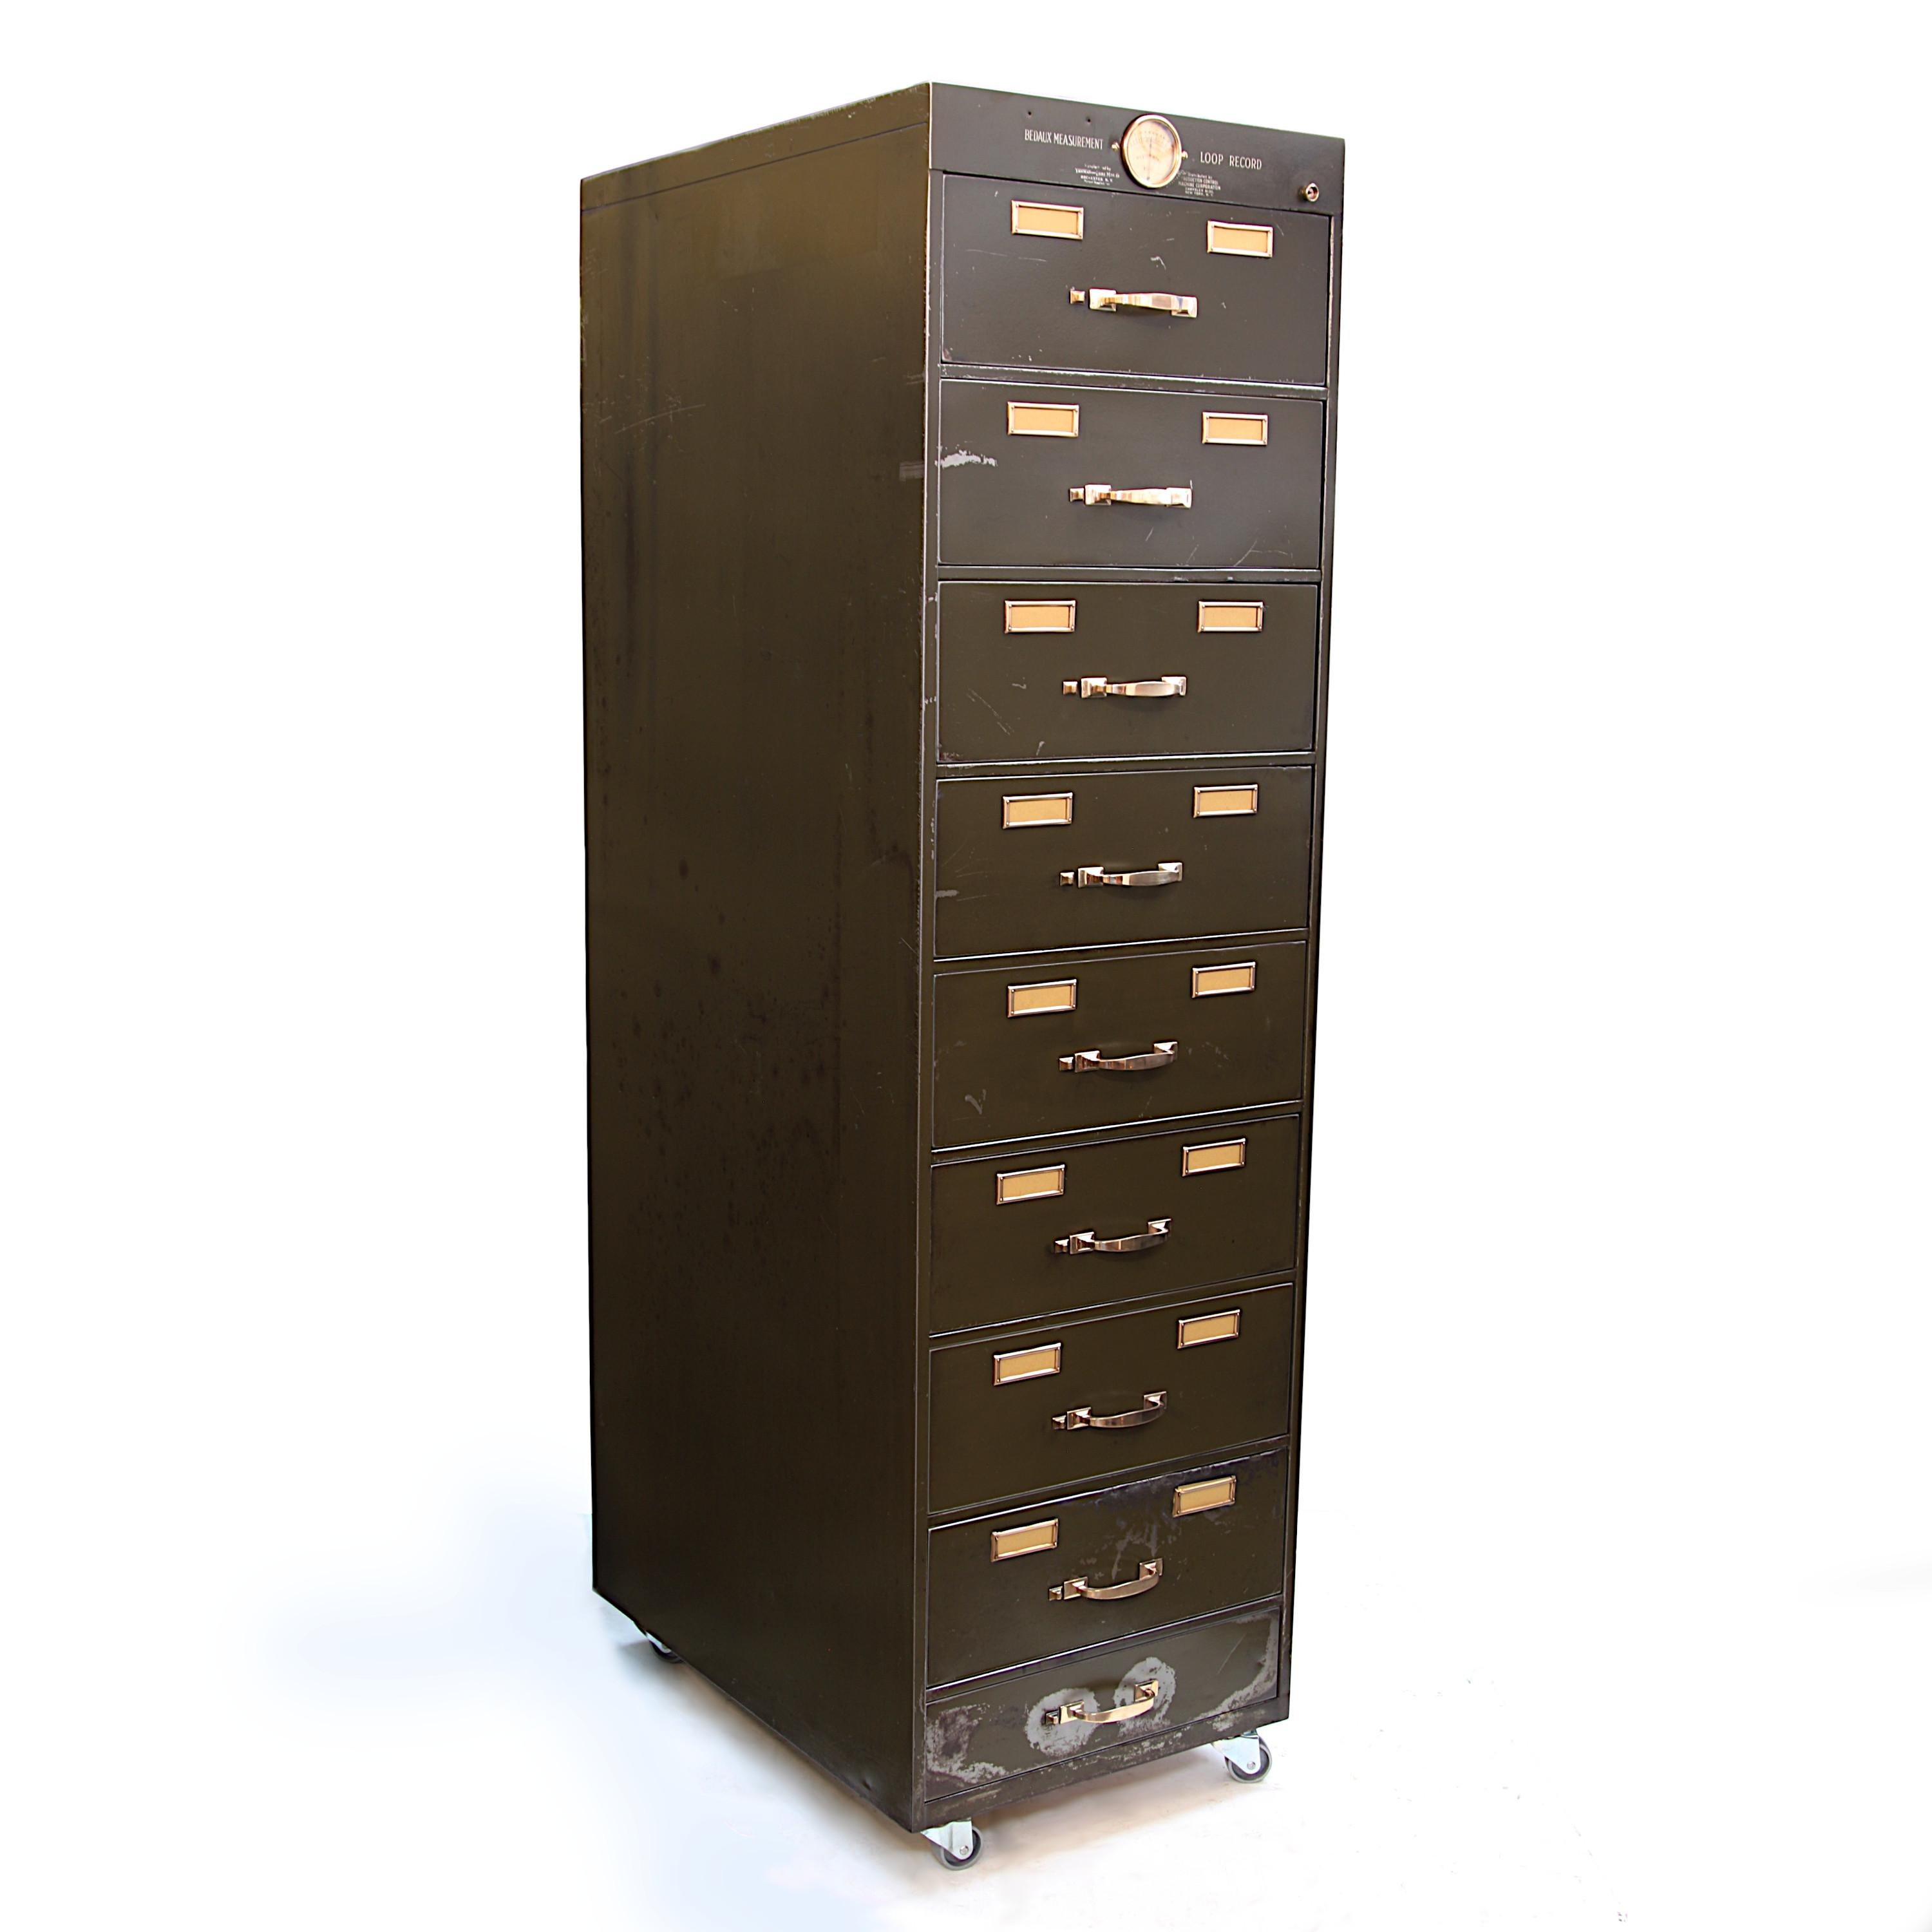 This unique file cabinet was originally built to house film reels as part of the 